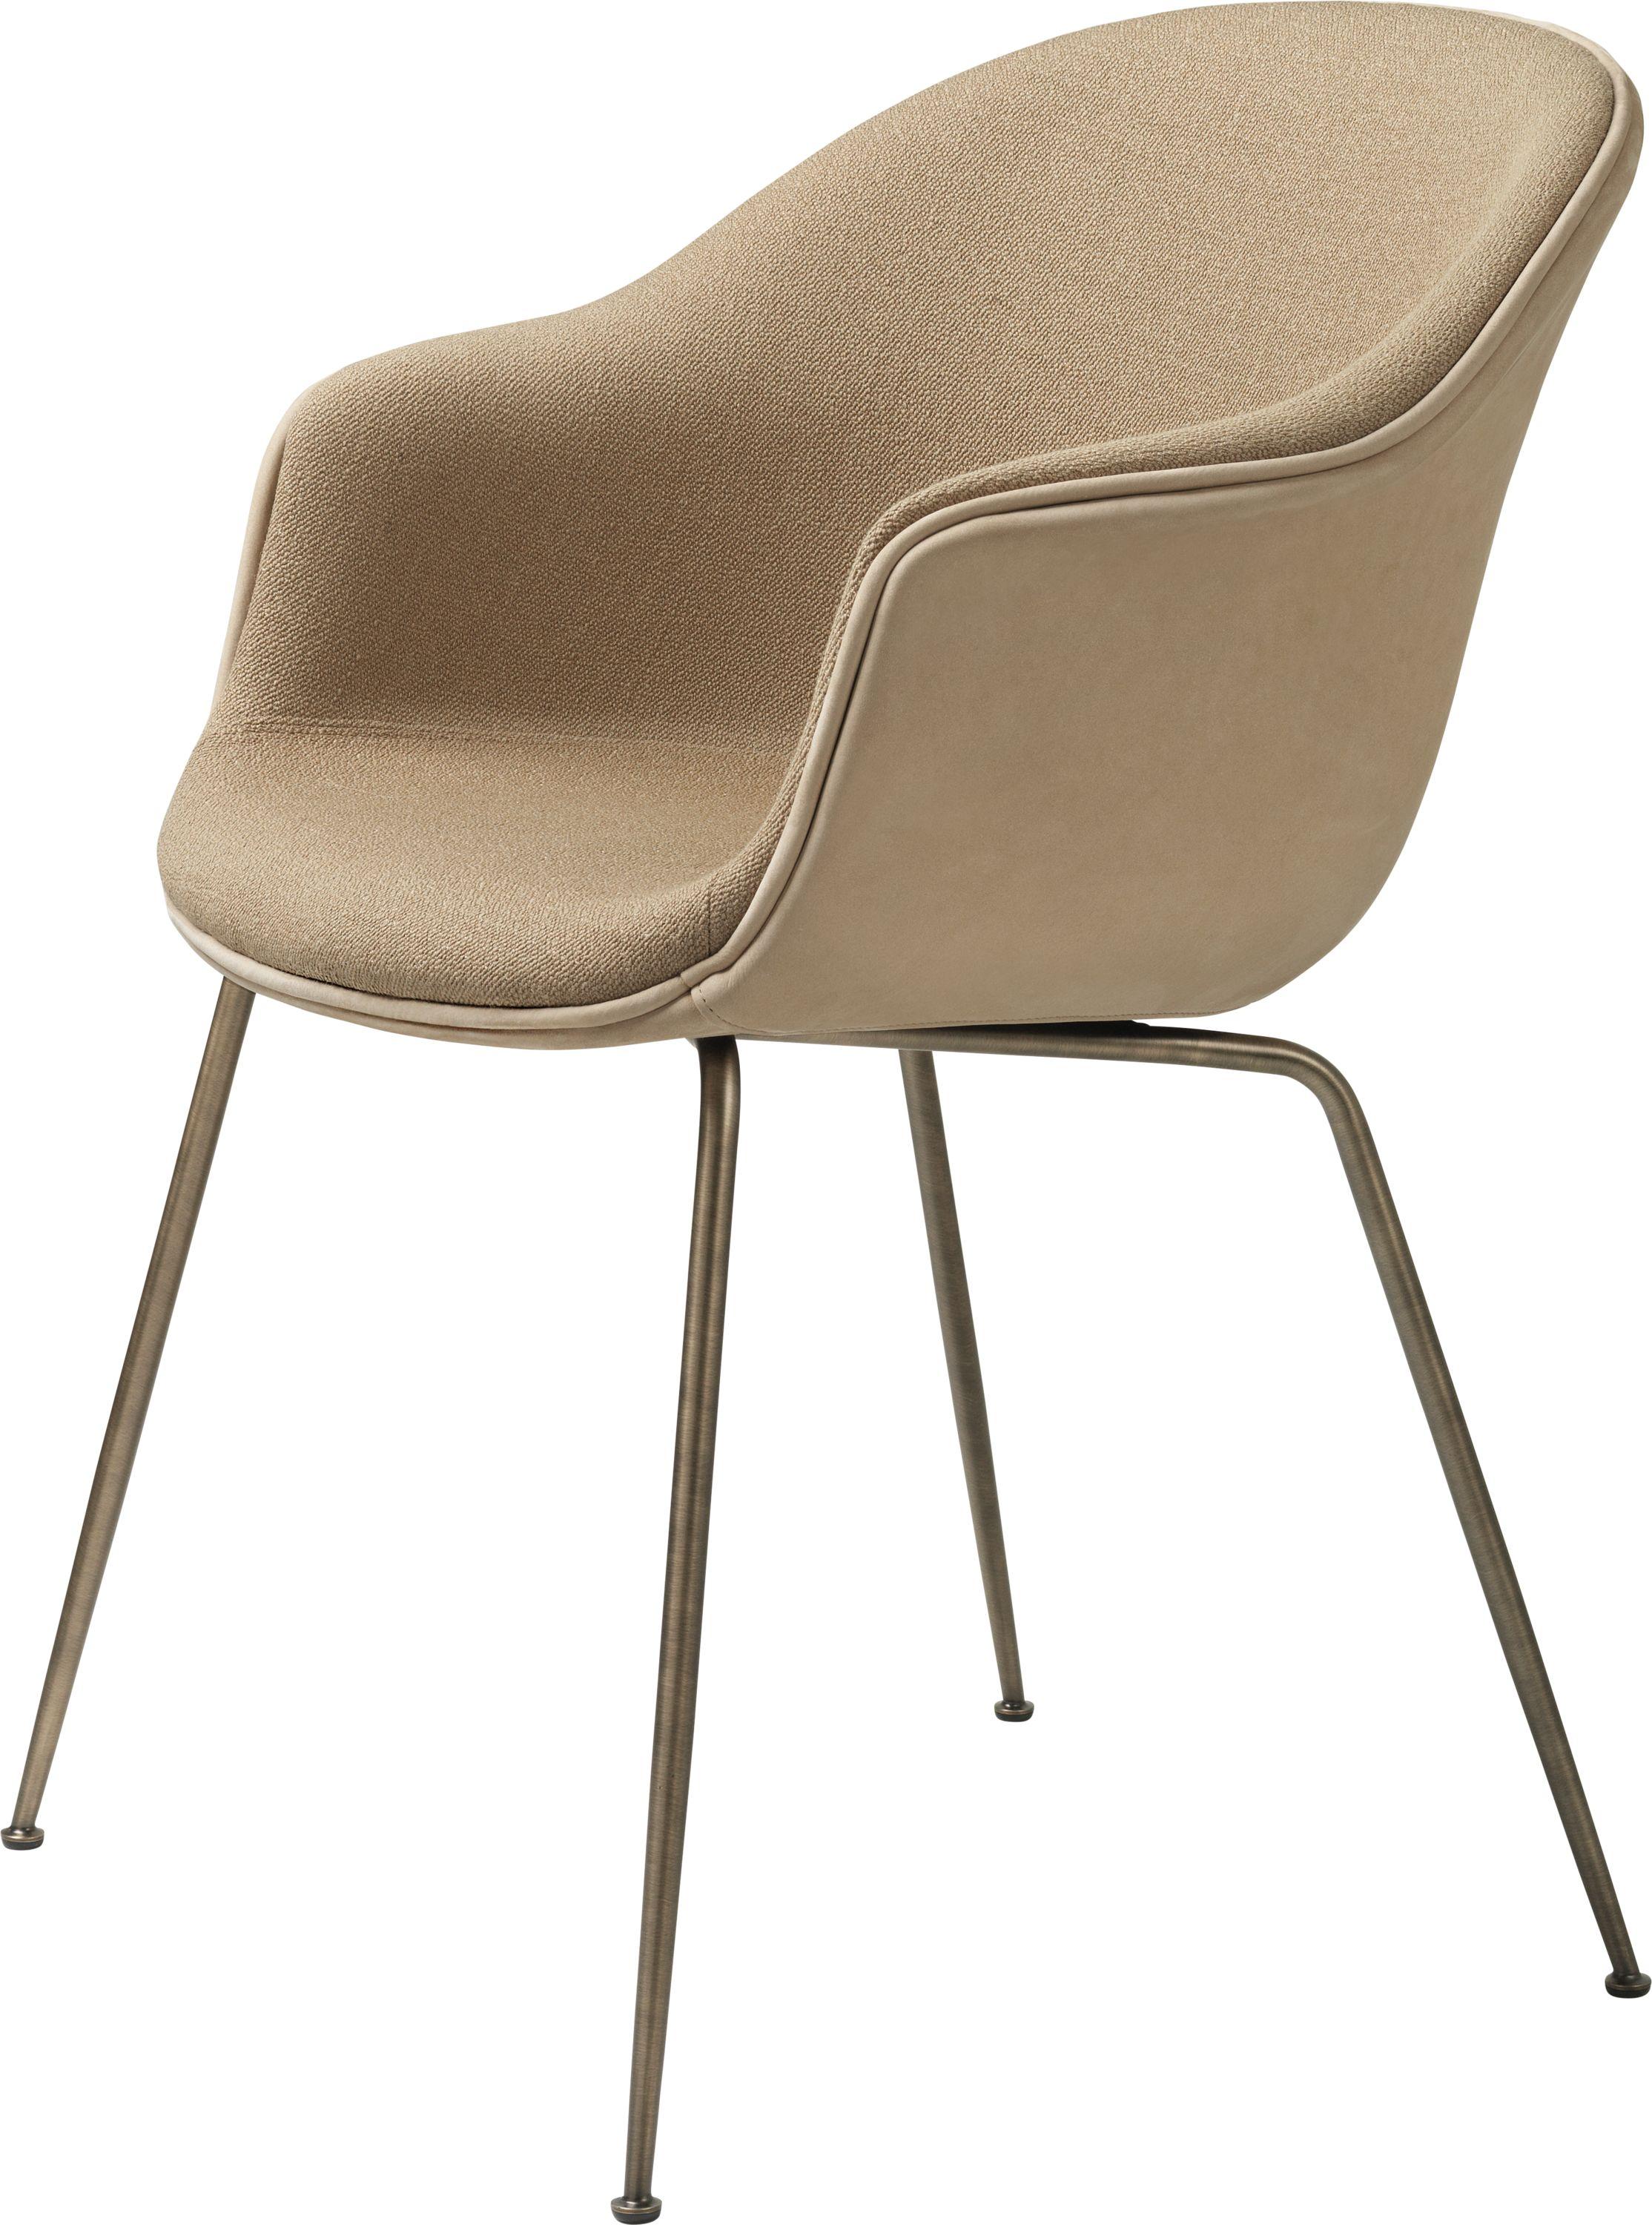 GamFratesi 'Bat' Dining Chair in Grey with Antique Brass Conic Base 7